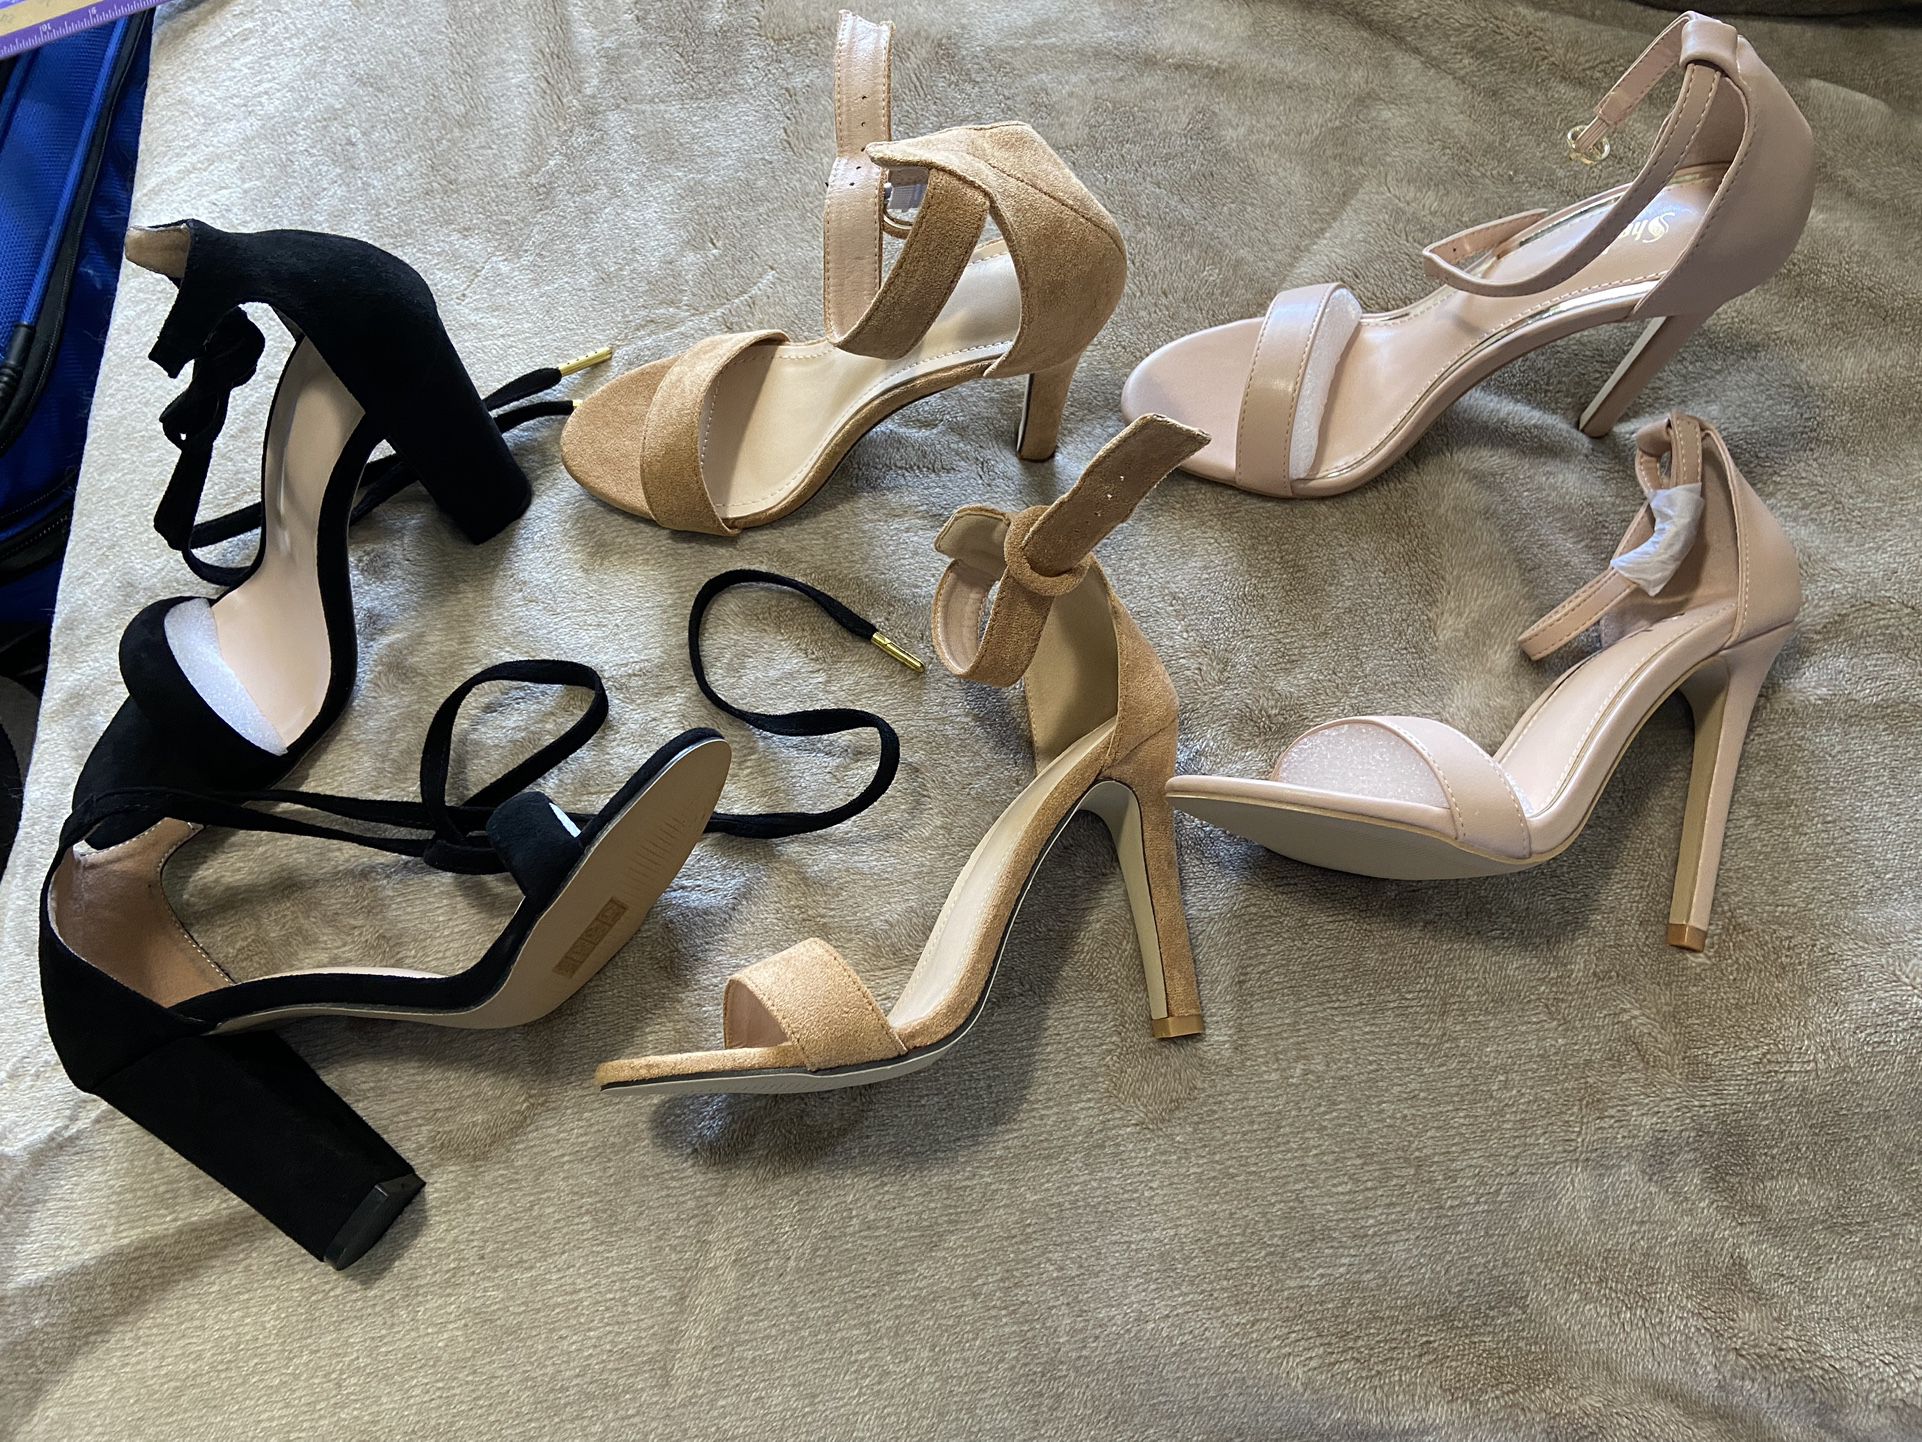 4 Pairs Of Brand New Heels  (size 6)